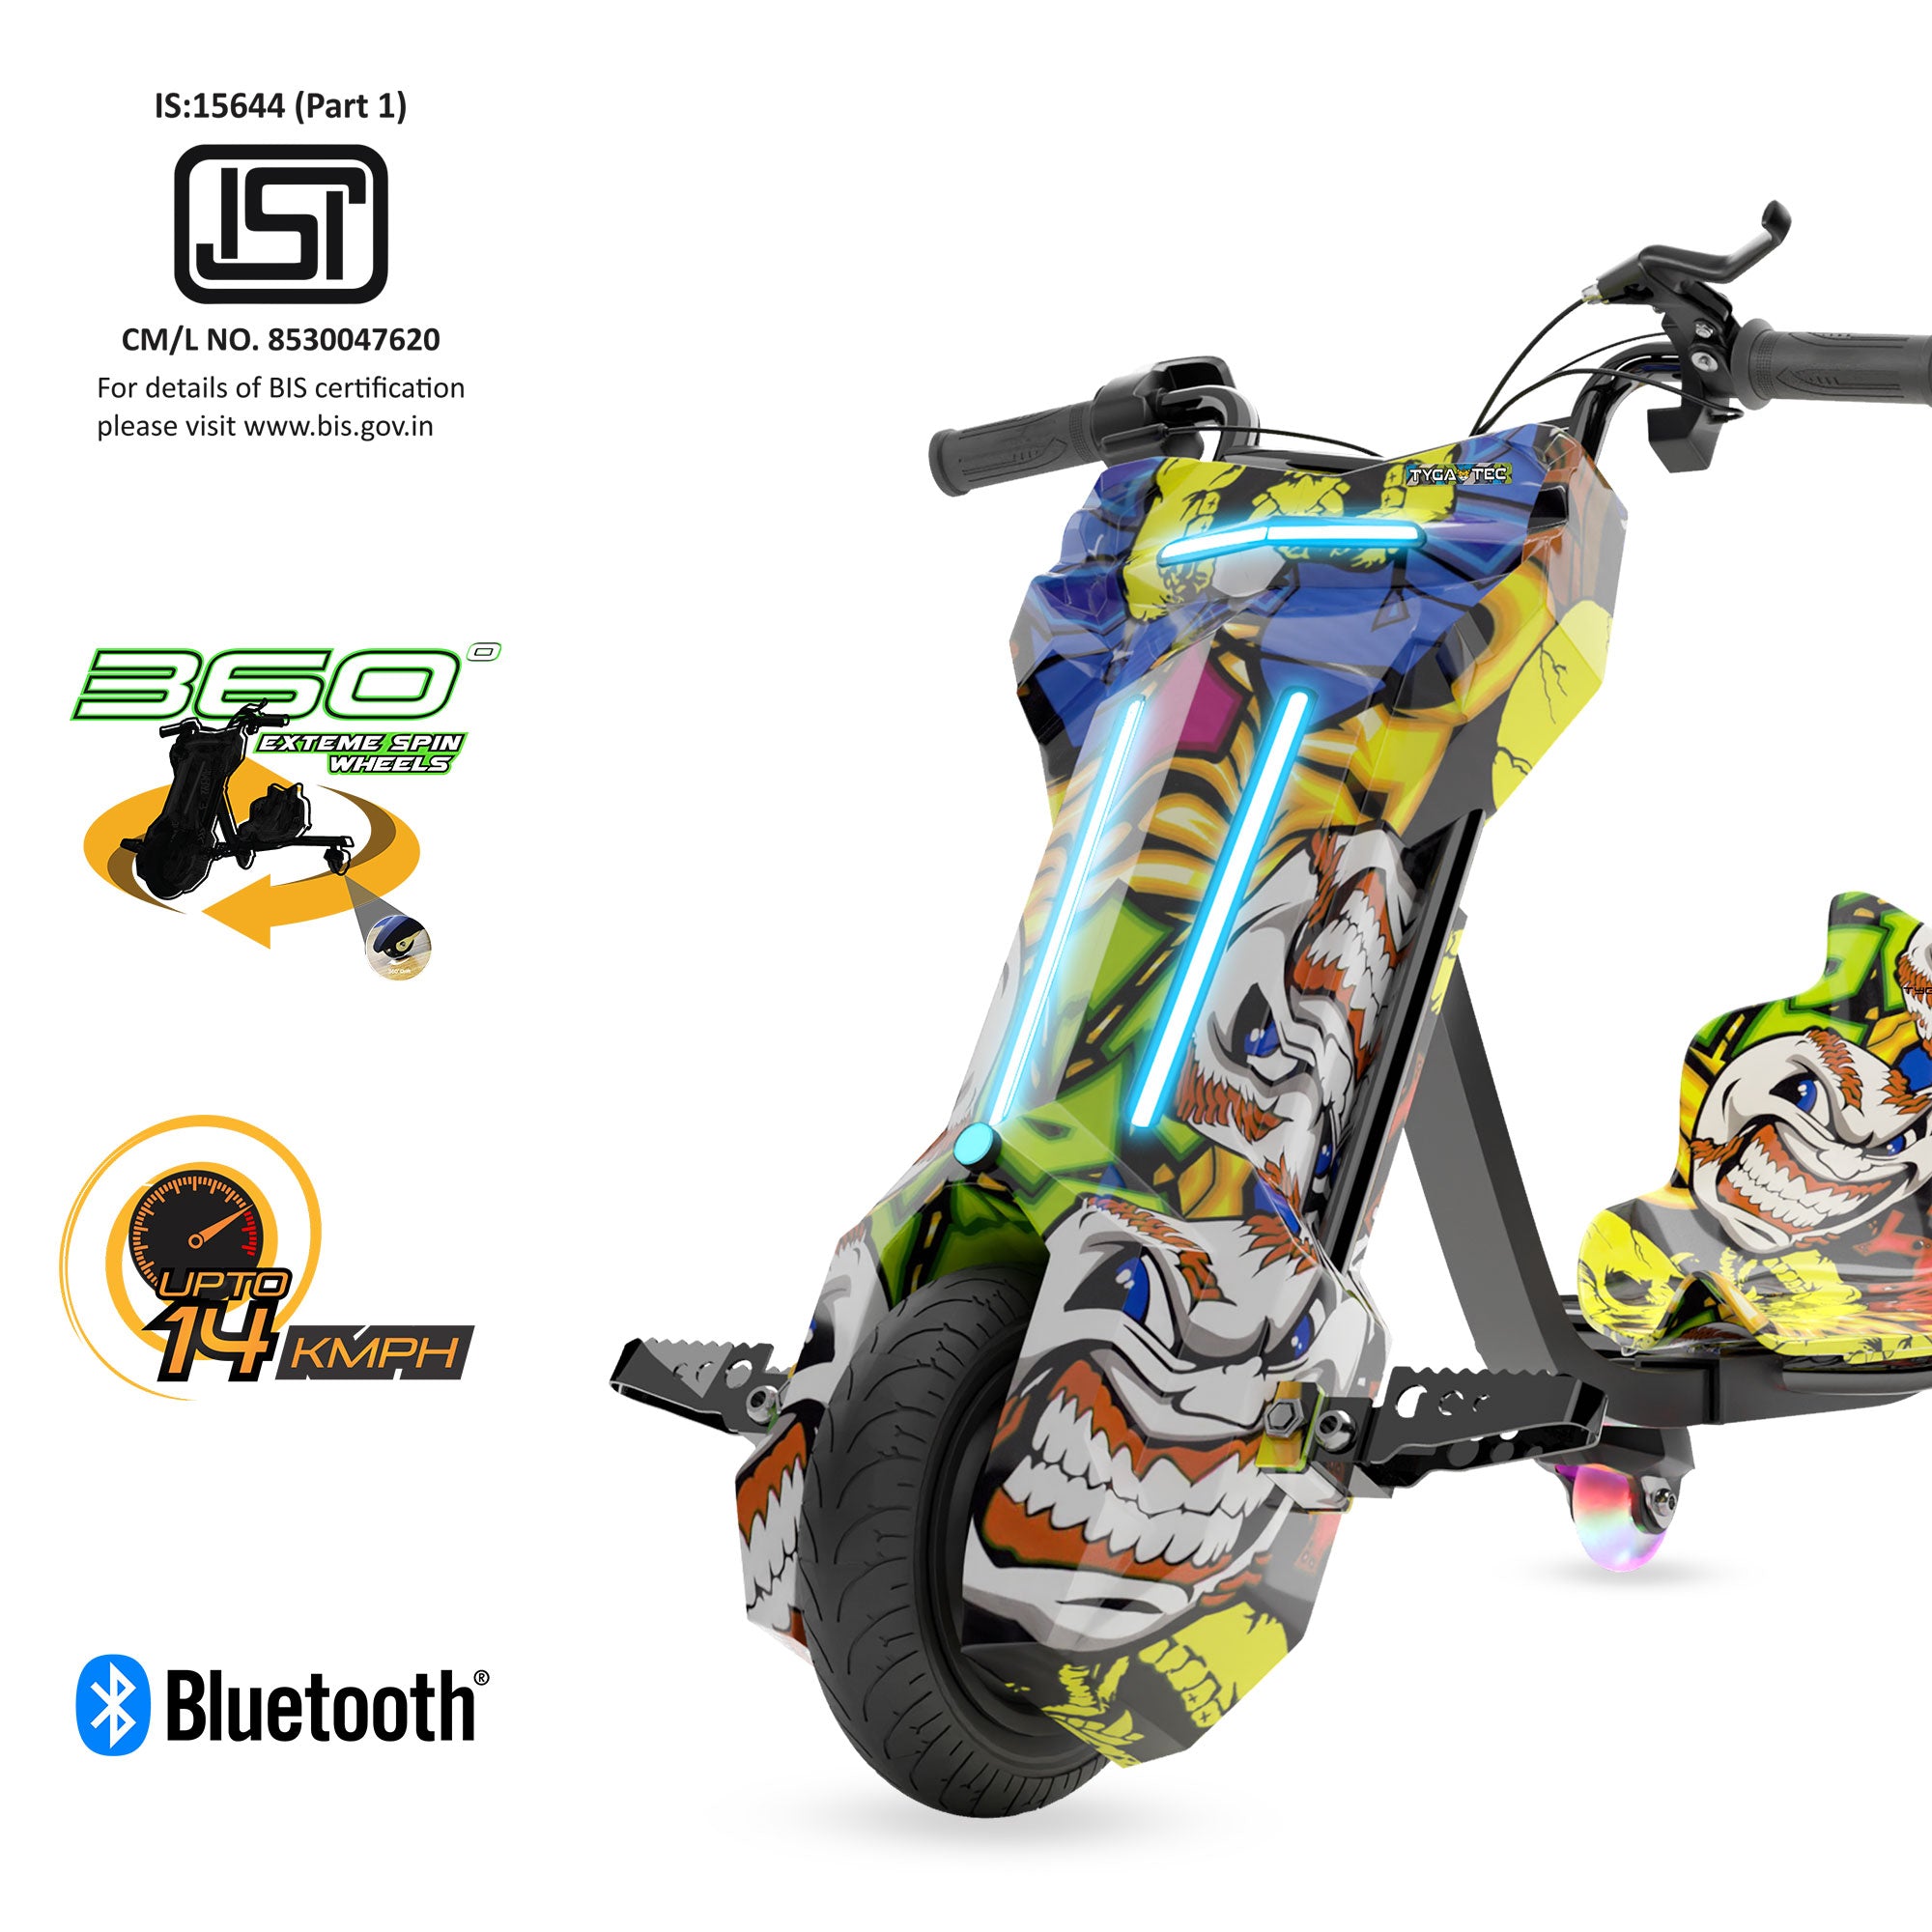 TYGATEC T9 3 WHEEL ELECTRIC 360 DRIFTER FOR KIDS AND ADULTS WITH LED LIGHT AND BLUETOOTH (Extreme Ed-hardy color)